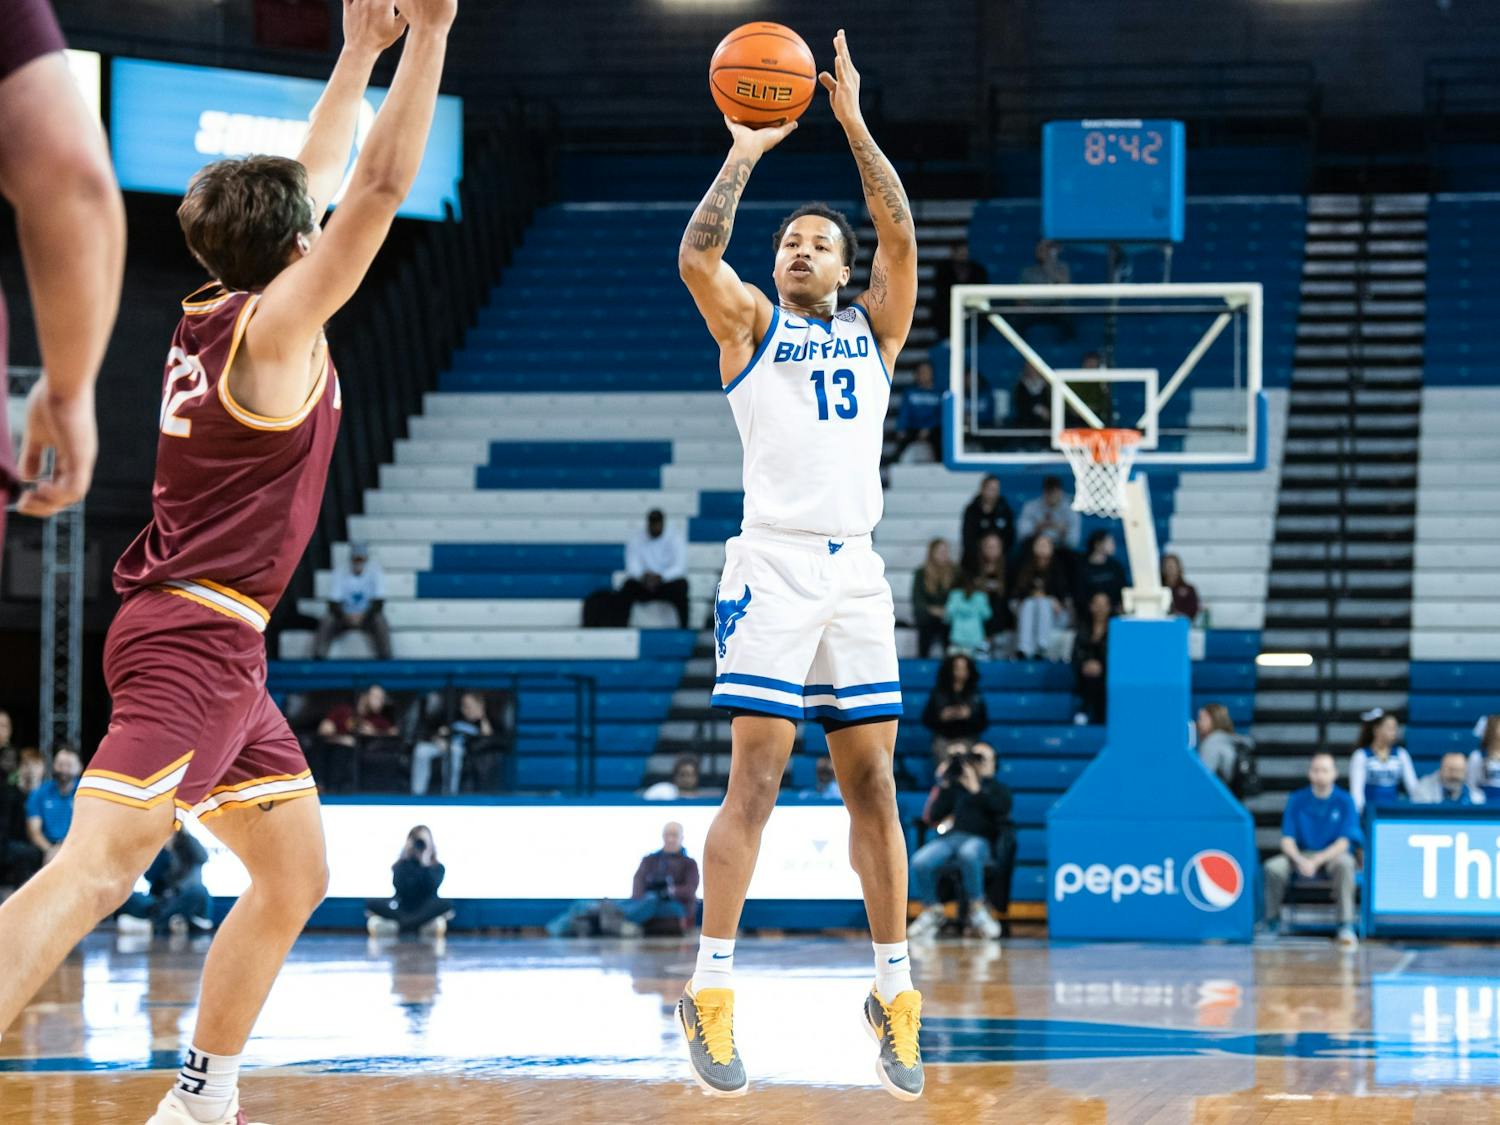 Junior guard Zid Powell takes a shot in UB’s Tuesday matchup against St. John Fisher.